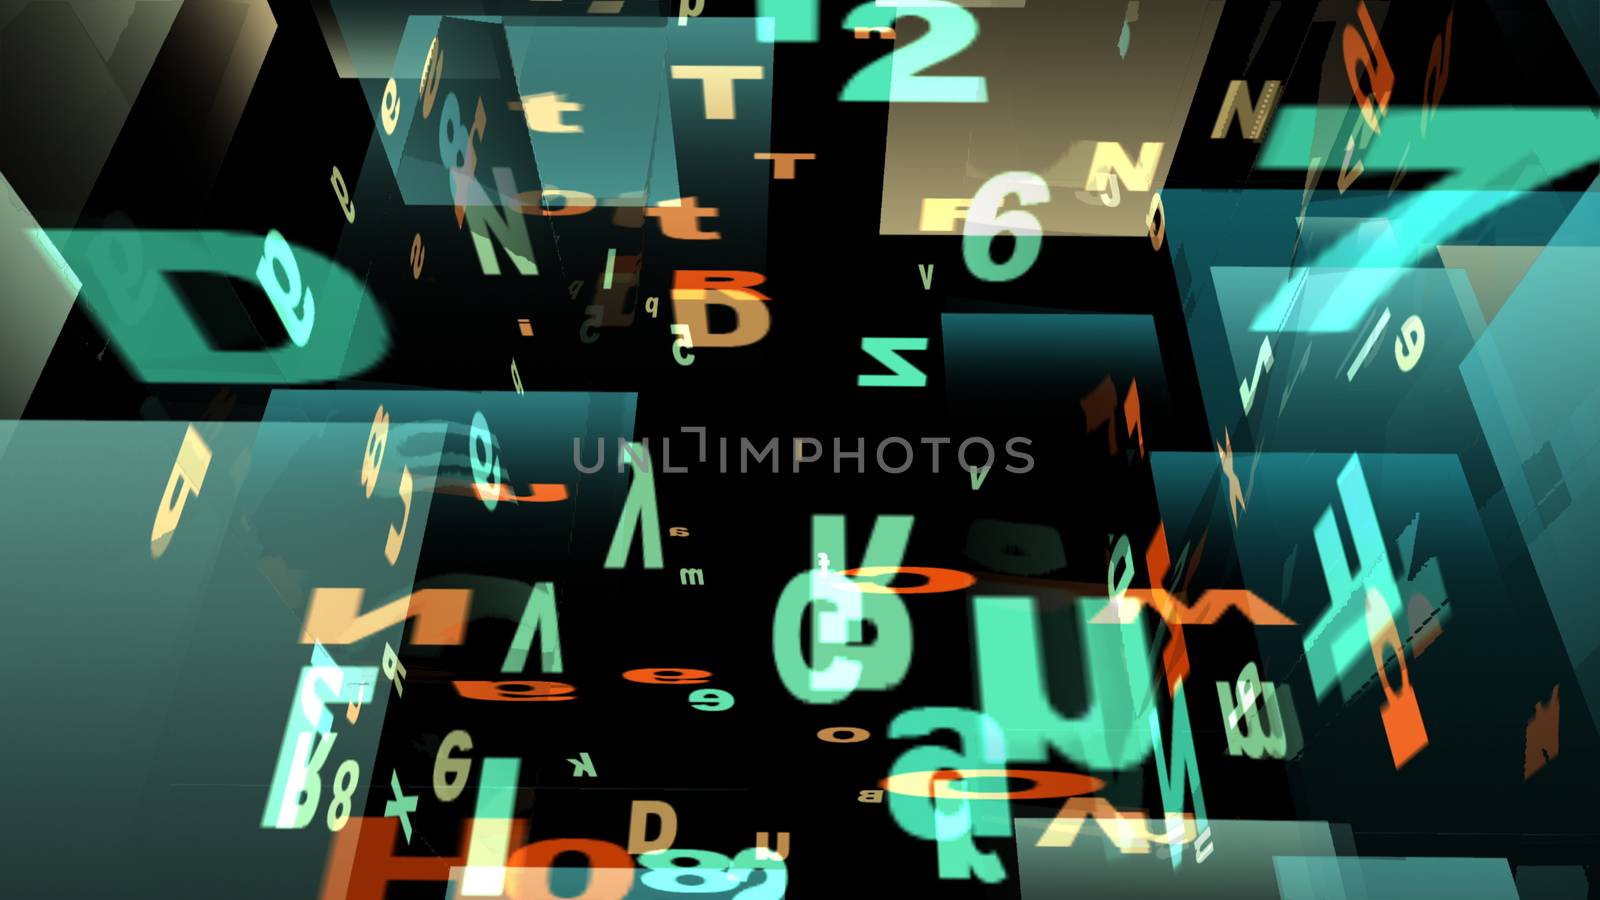 Digital Illustration of Letters and Numbers